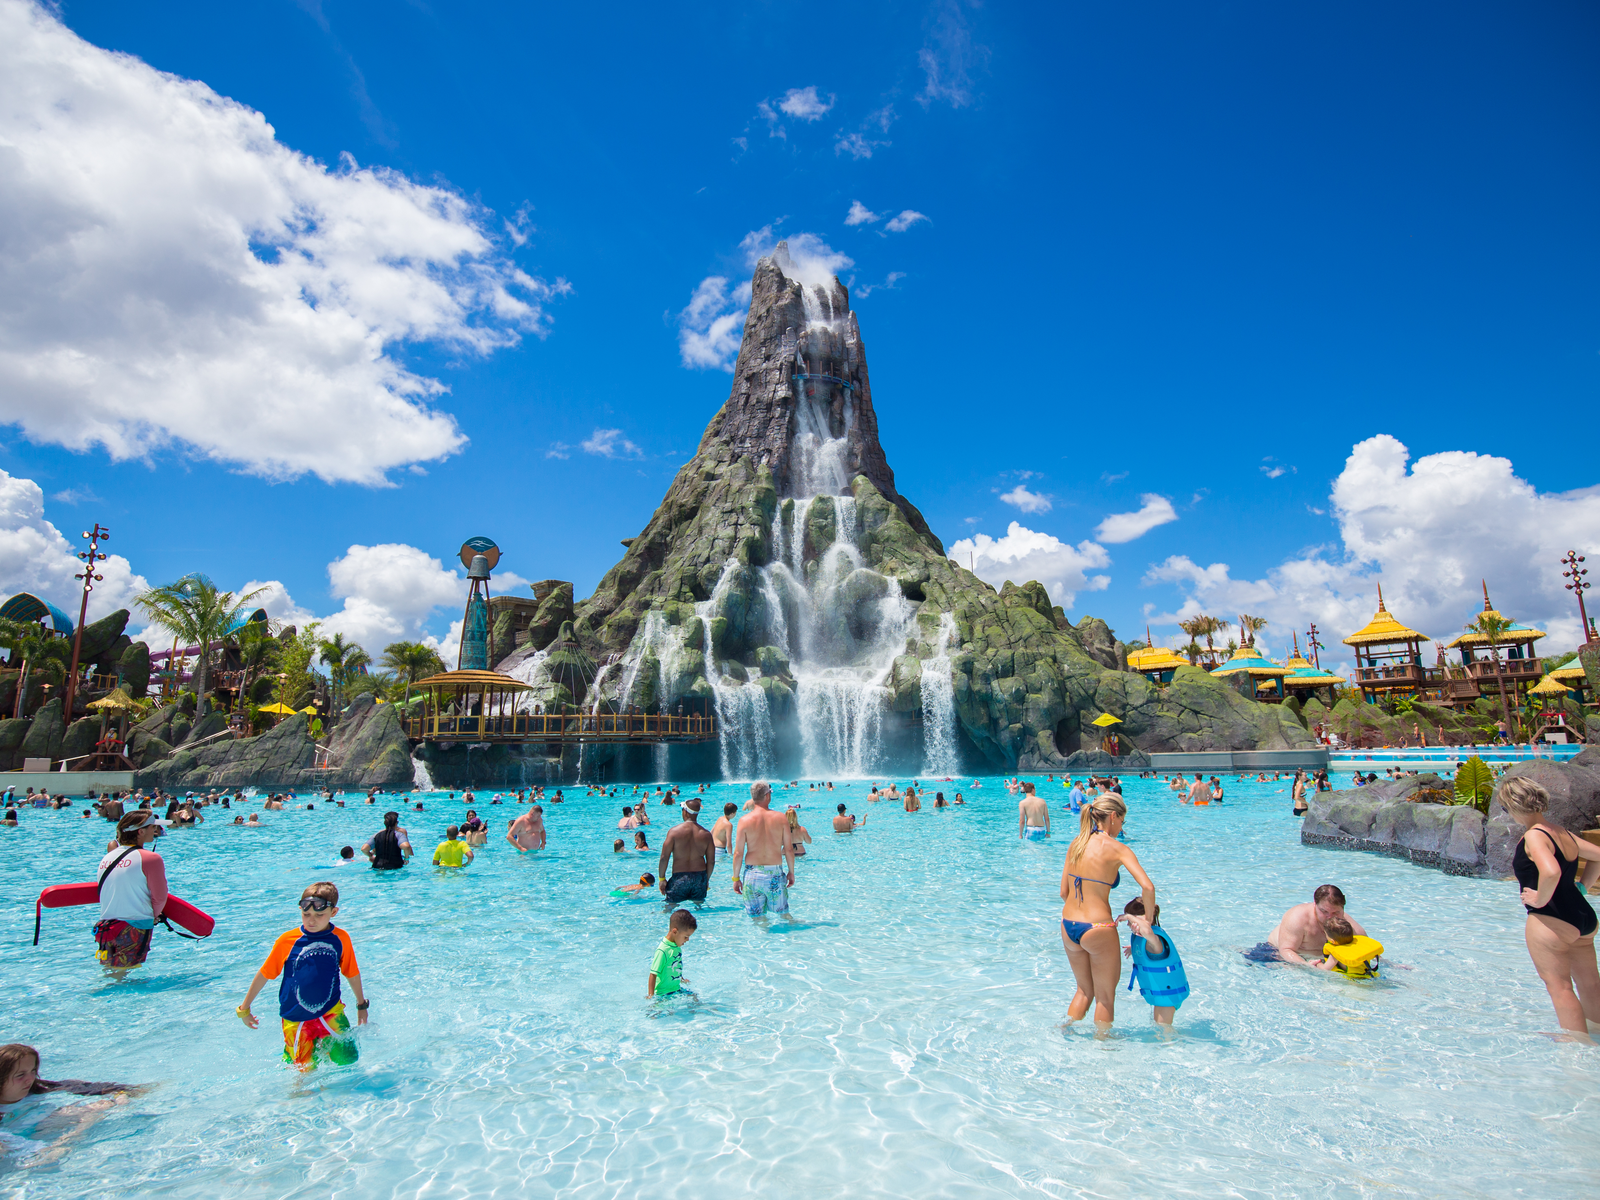 A busy sunny day at one of the best water parks in the USA, Universal's Volcano Bay in Orlando, Florida where parents are having a good time with their kids in a shallow pool